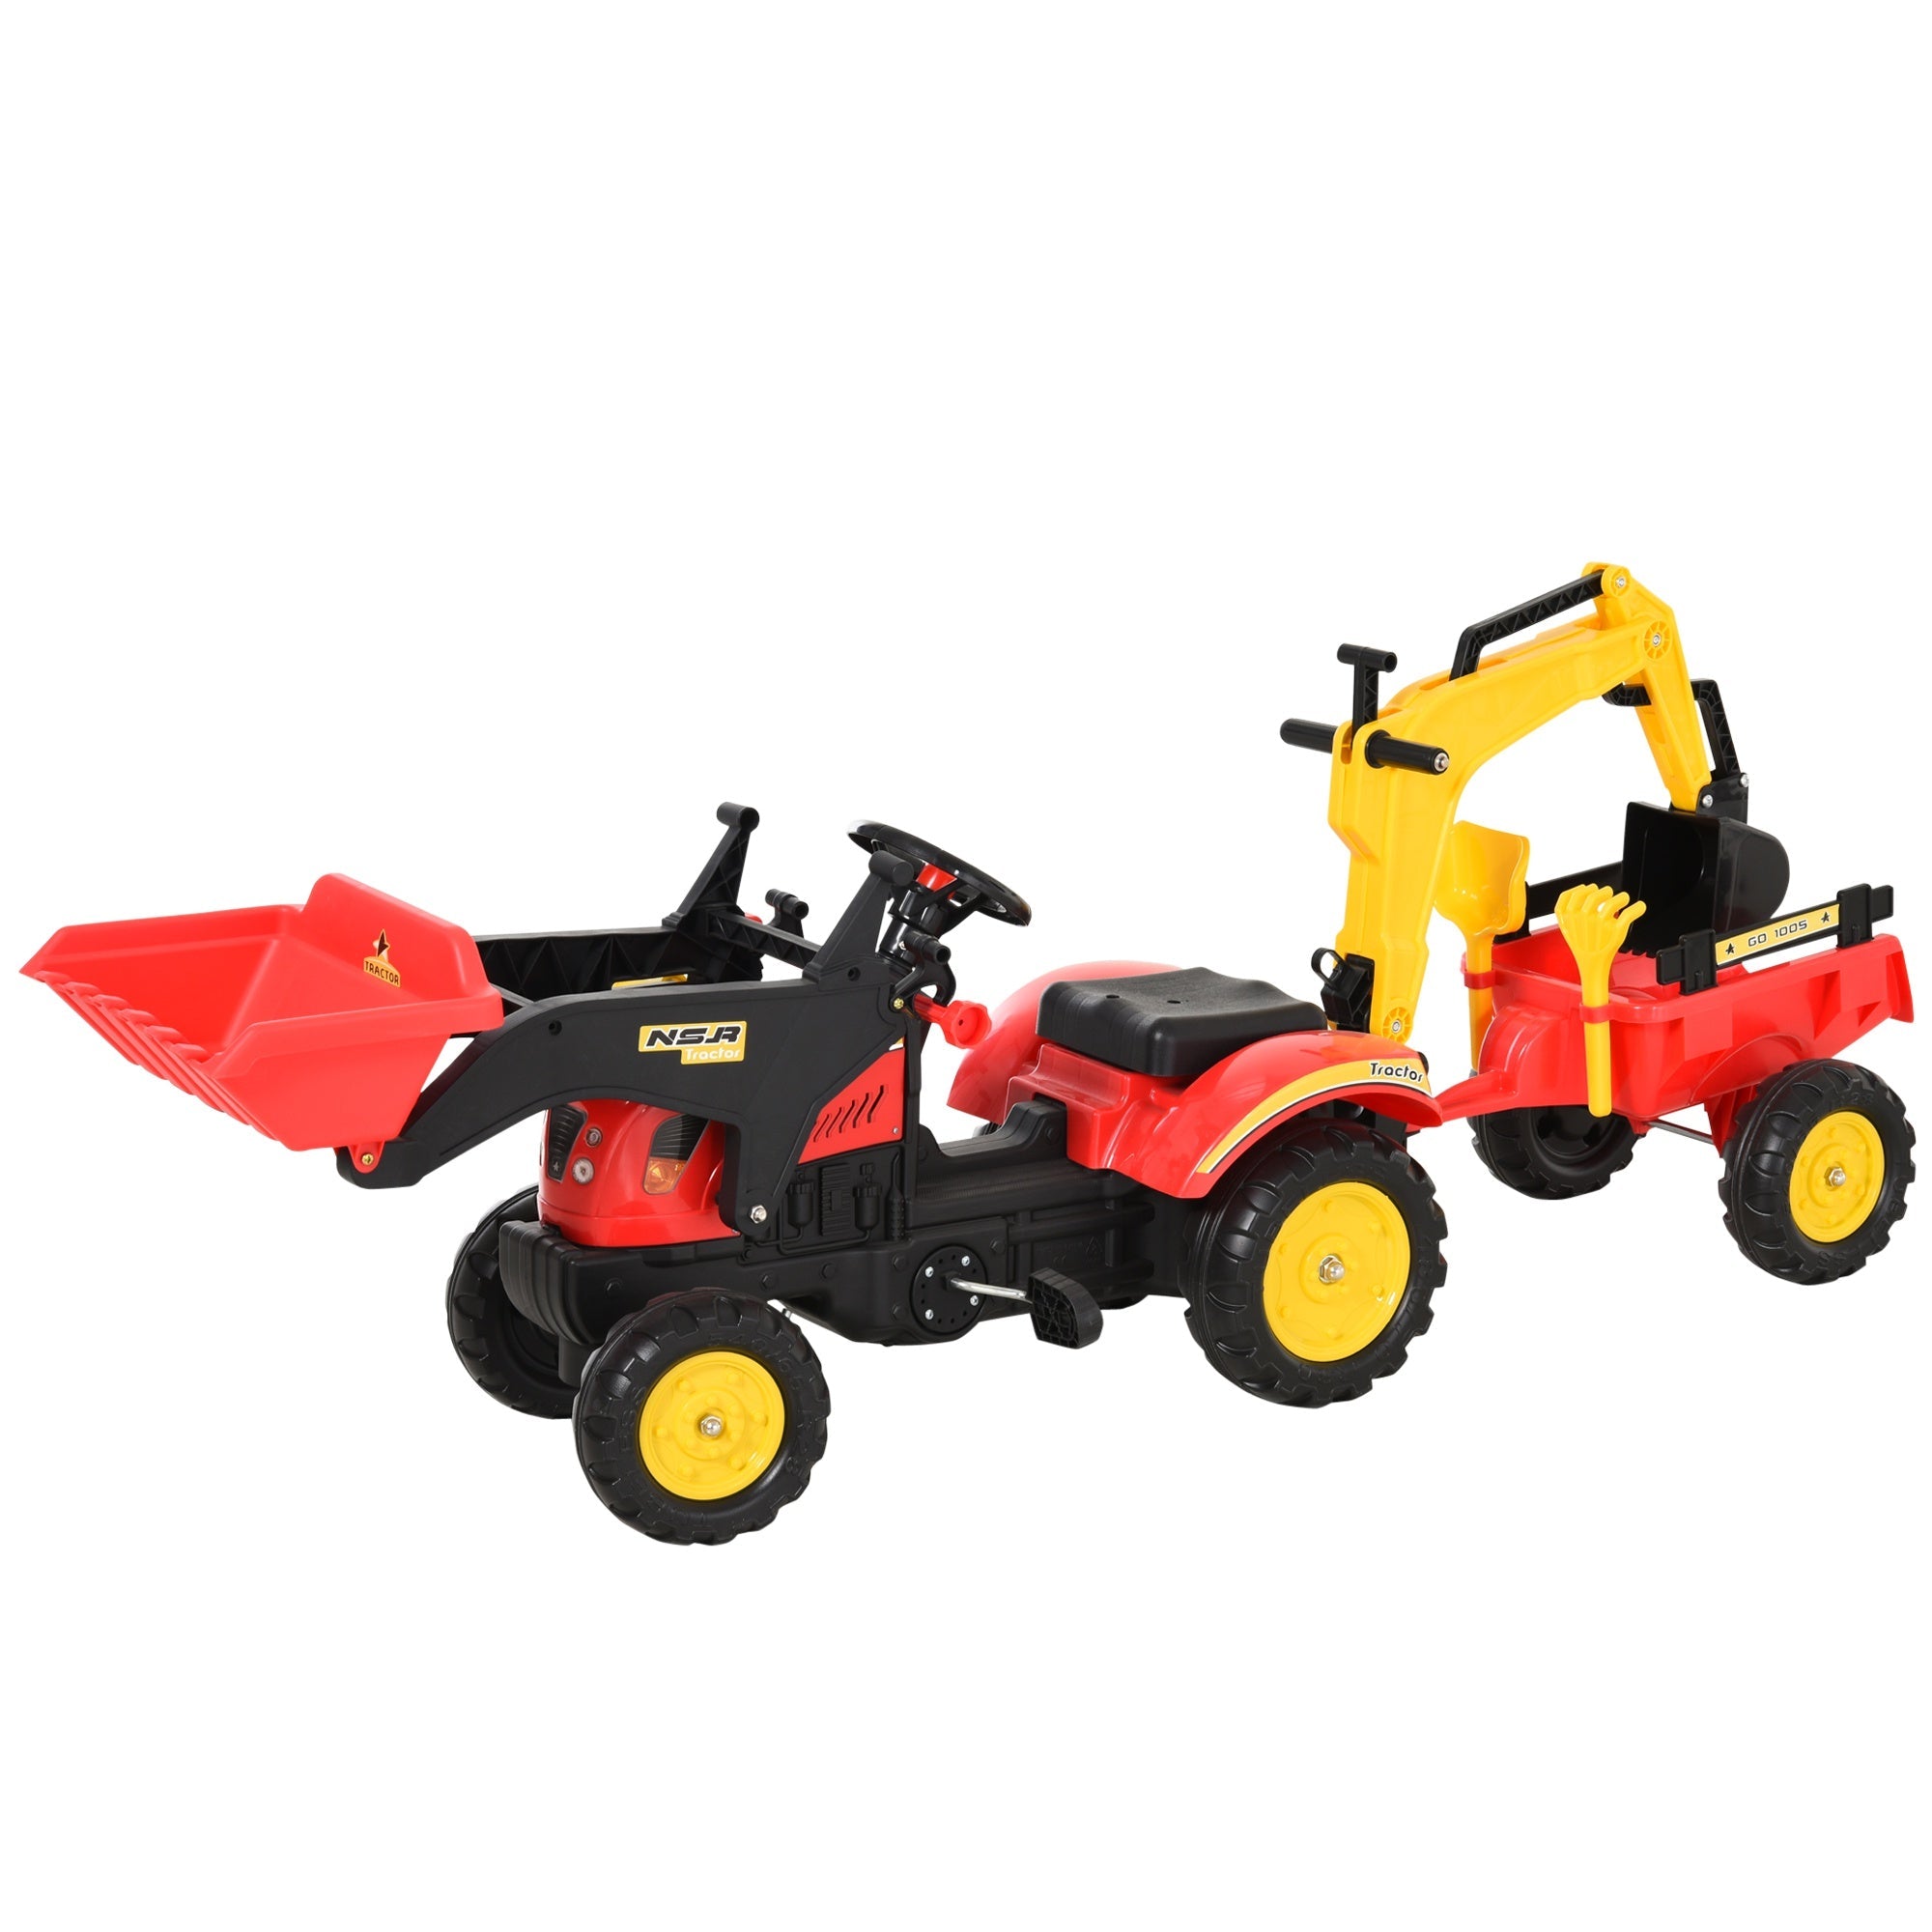 Kids Controllable Excavator with Trailer - Red/Yellow - HOMCOM  | TJ Hughes Red